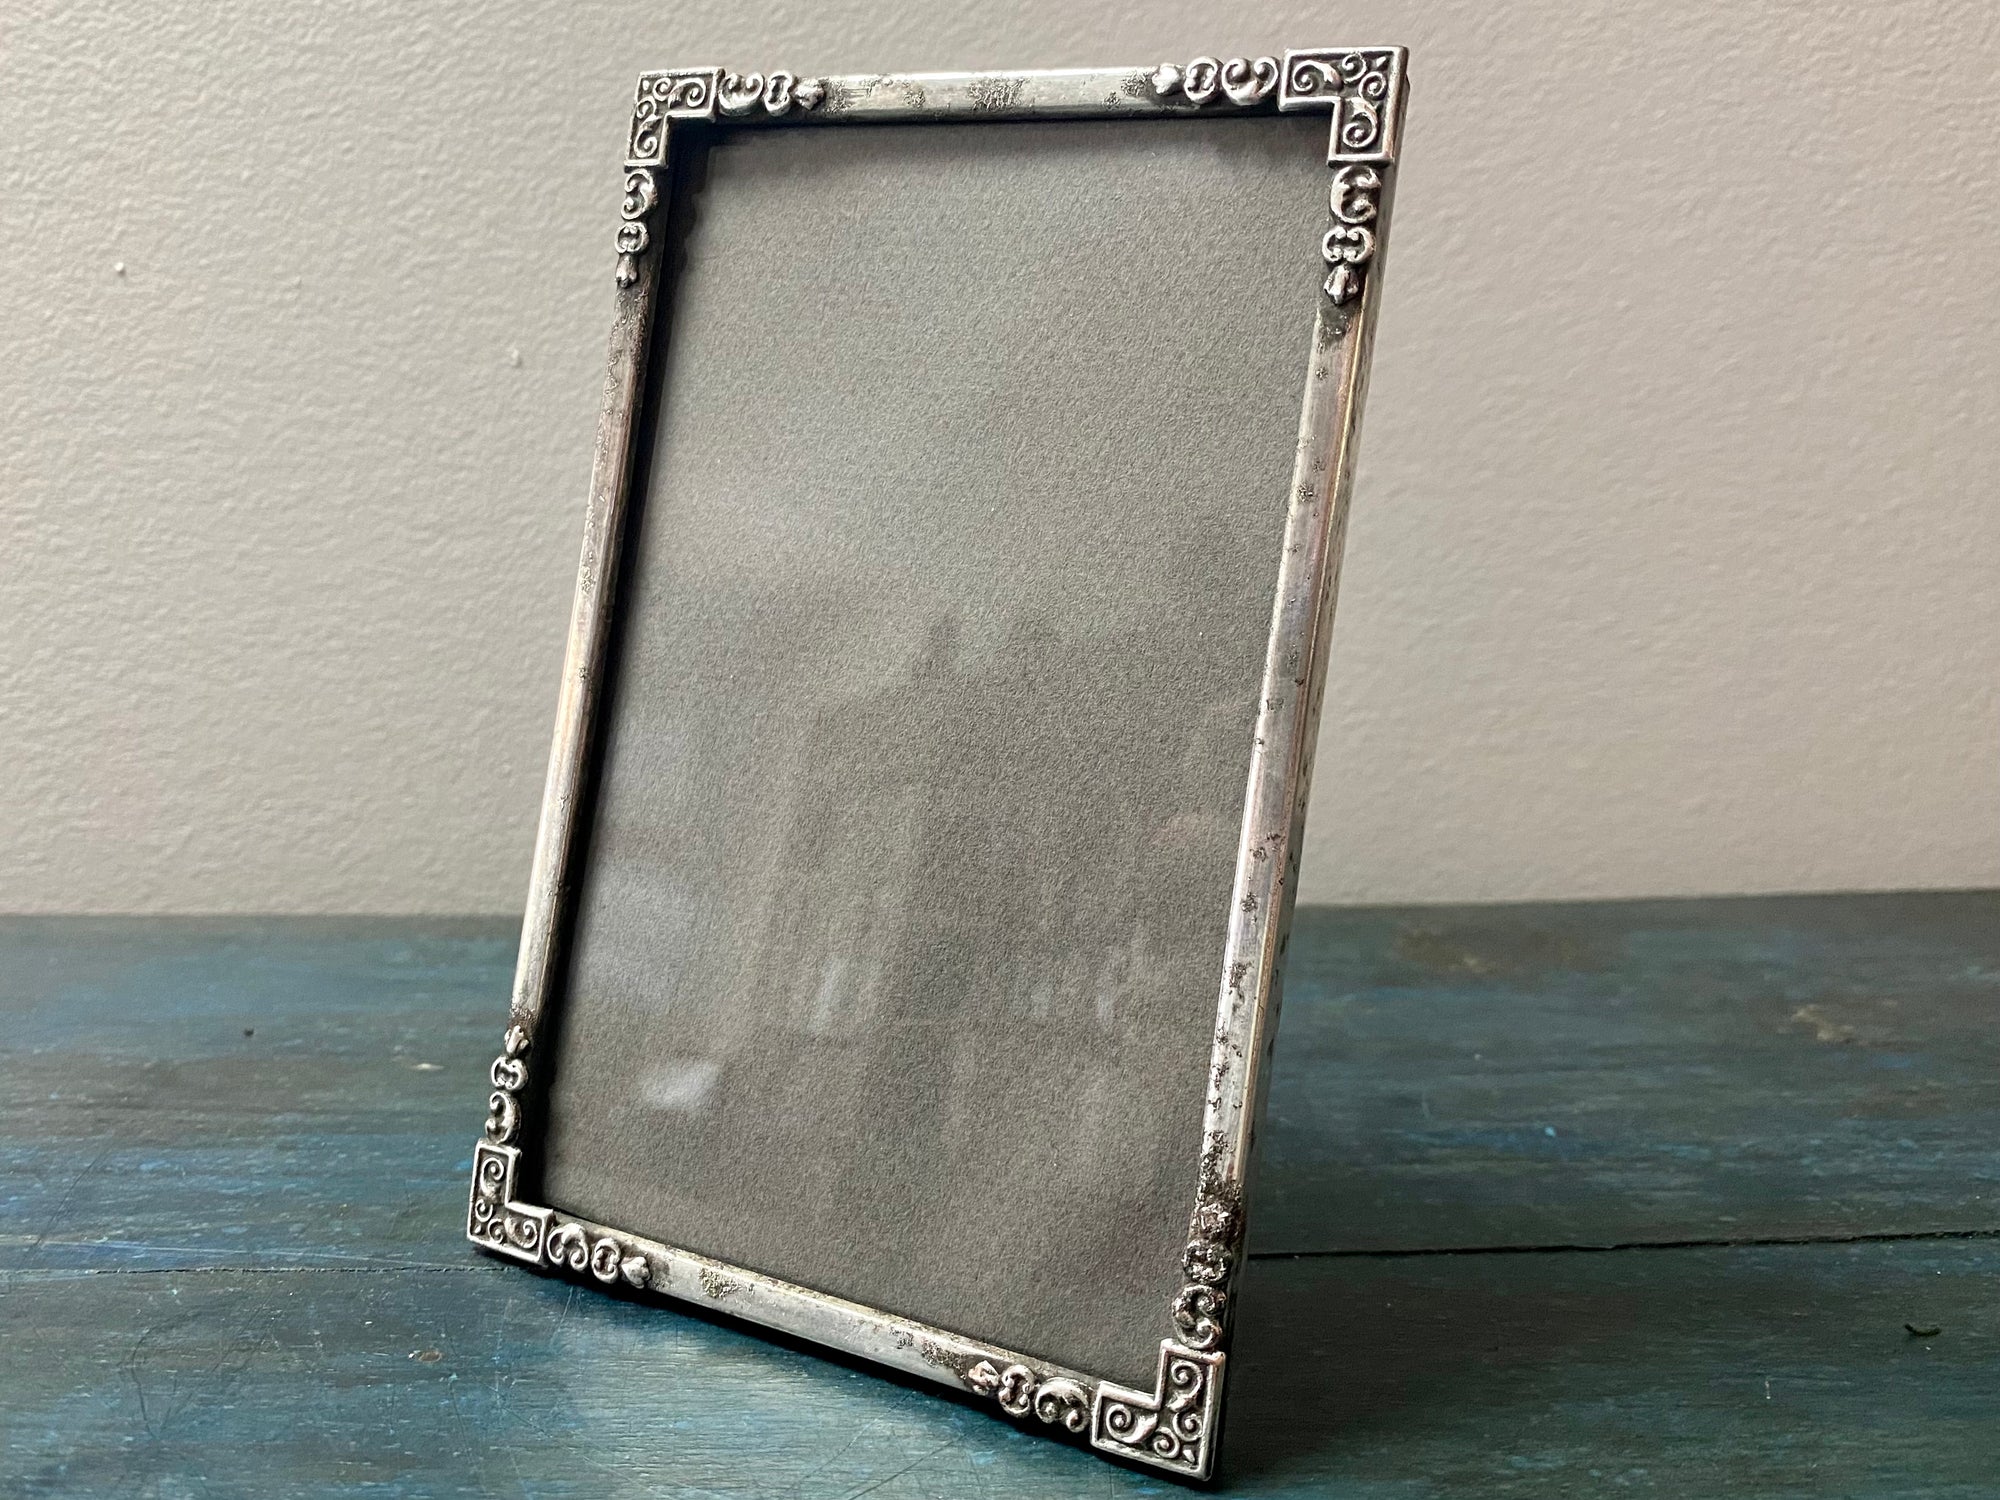 Full of character, this charming photo frame is silver plate over what appears to be an iron or brass base metal. While it it does show pitting and marking, its appearance is very much in keeping with its age. Circa 1920. Outside frame 14.5 x 9.2 cm, inside 8.2 x 18 cm.